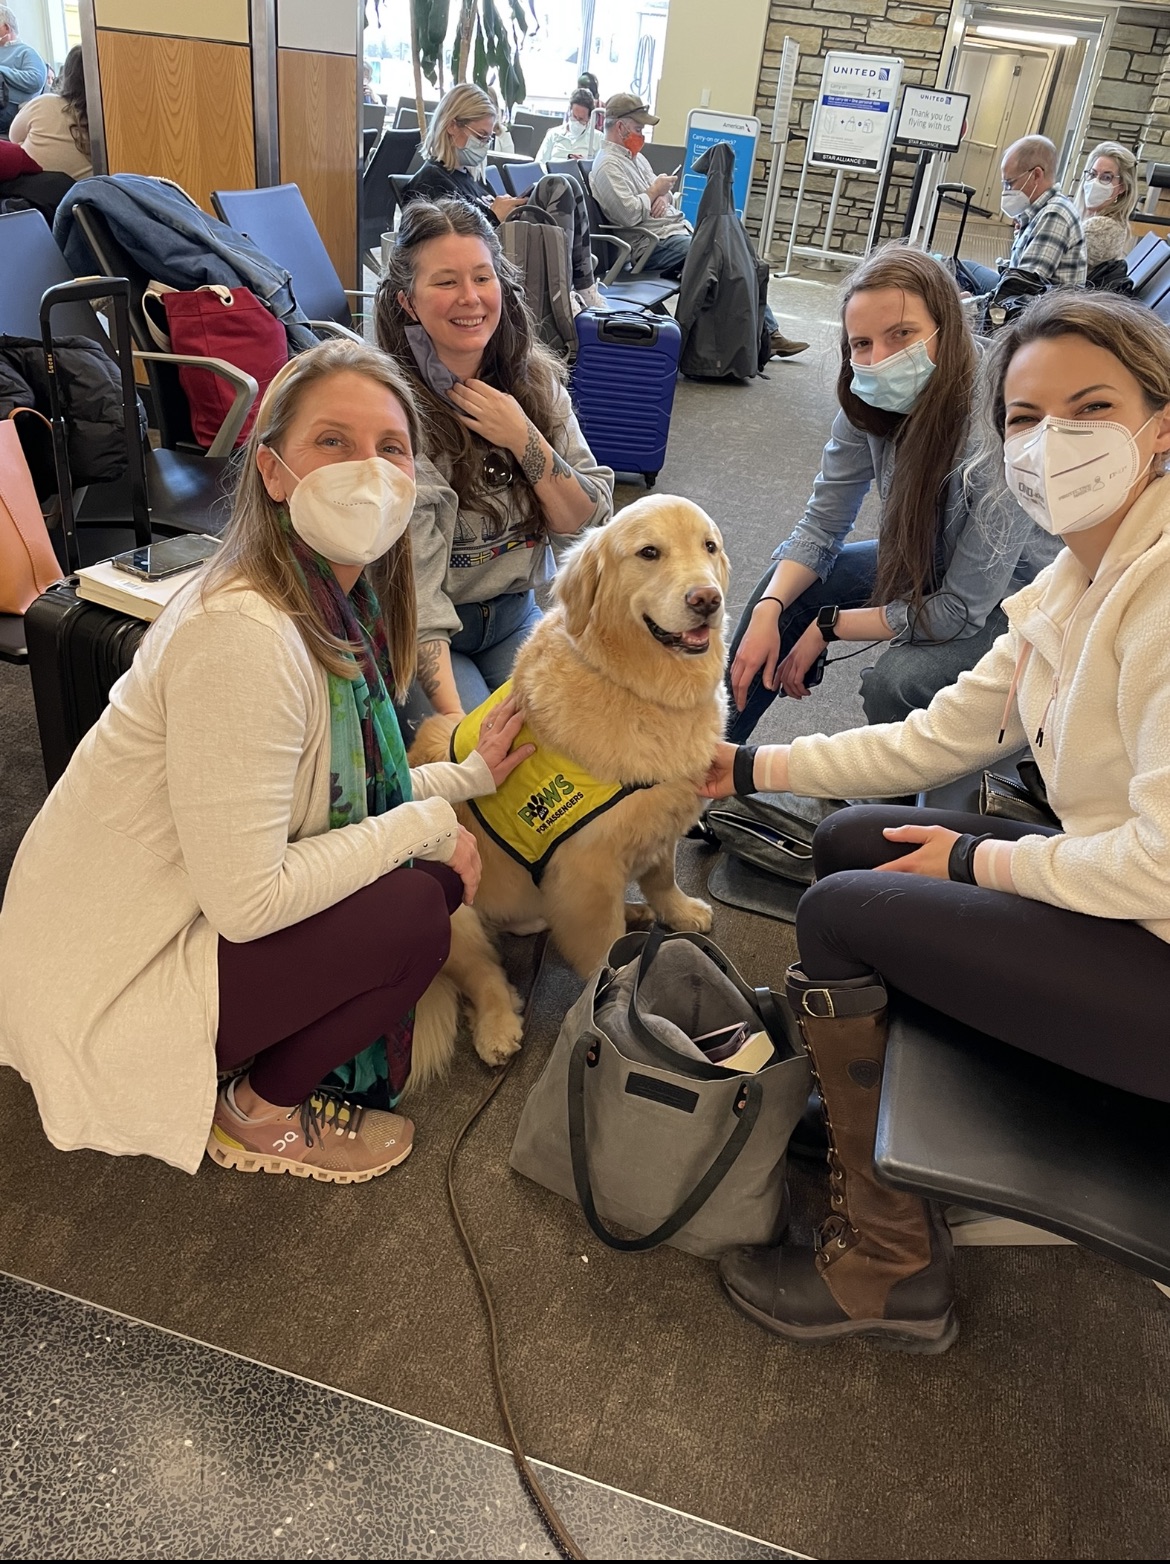 people wearing masks sit in a circle around a golden retriever therapy dog.